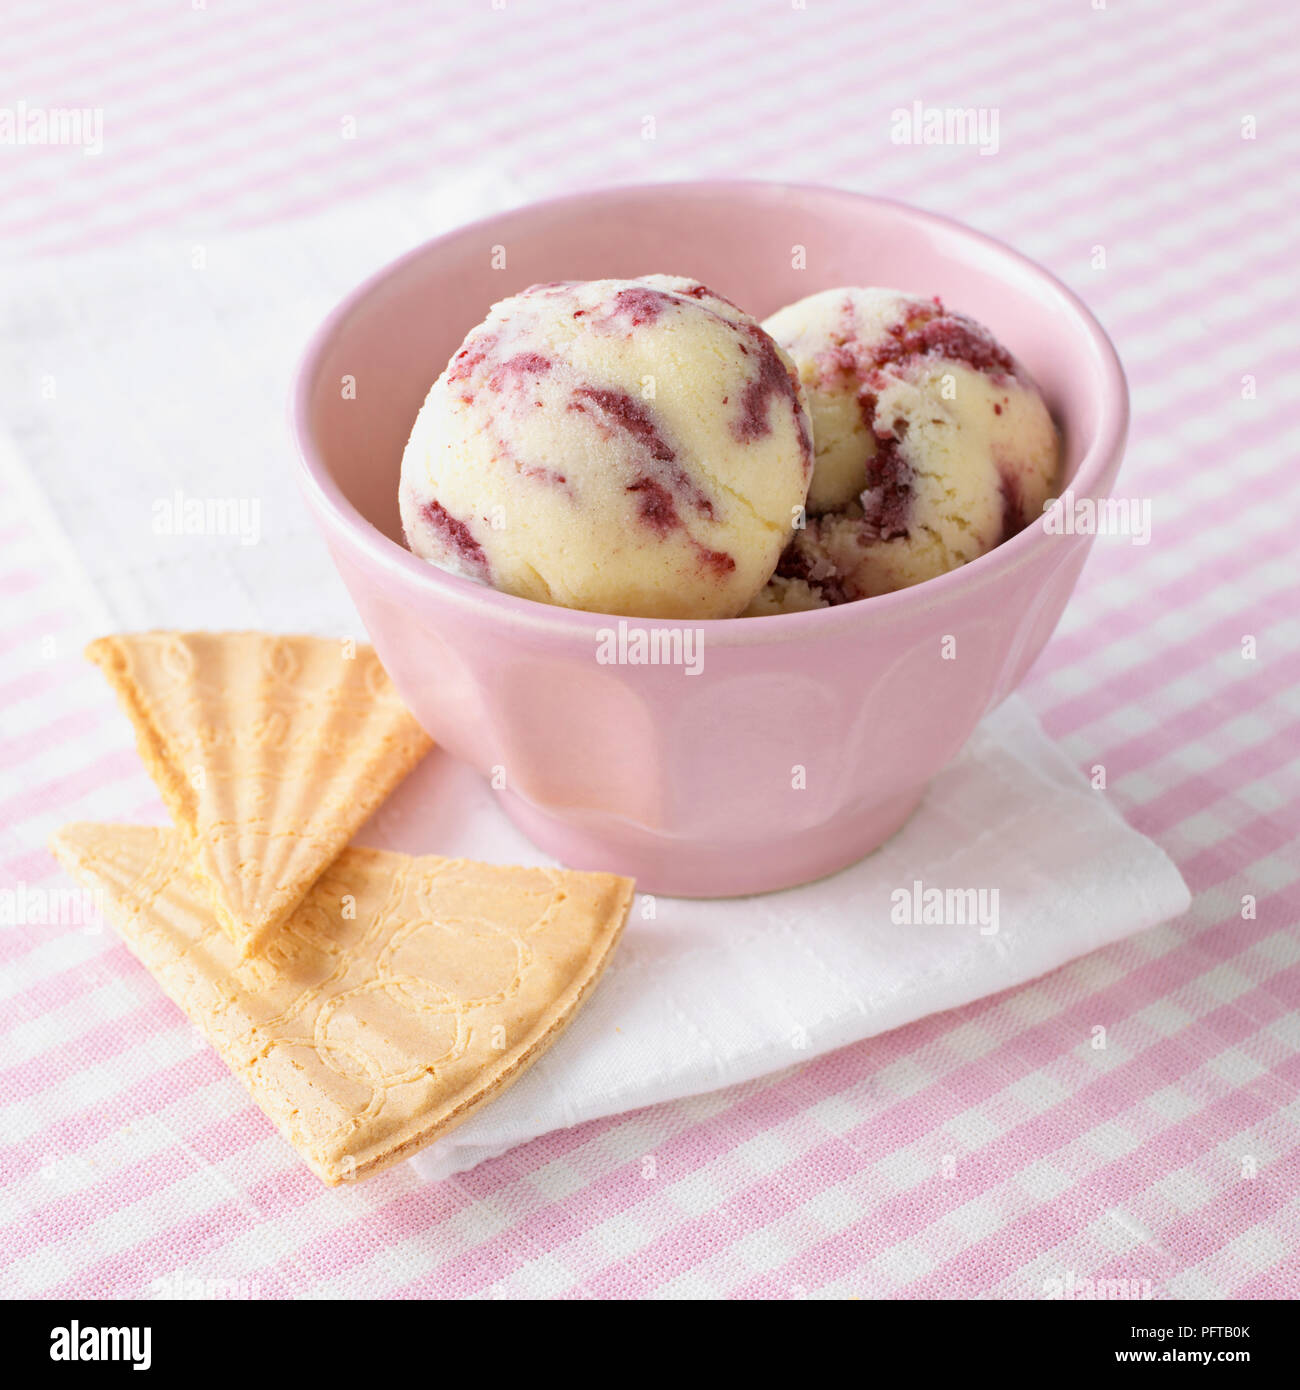 Blueberry ripple ice cream and wafers Stock Photo